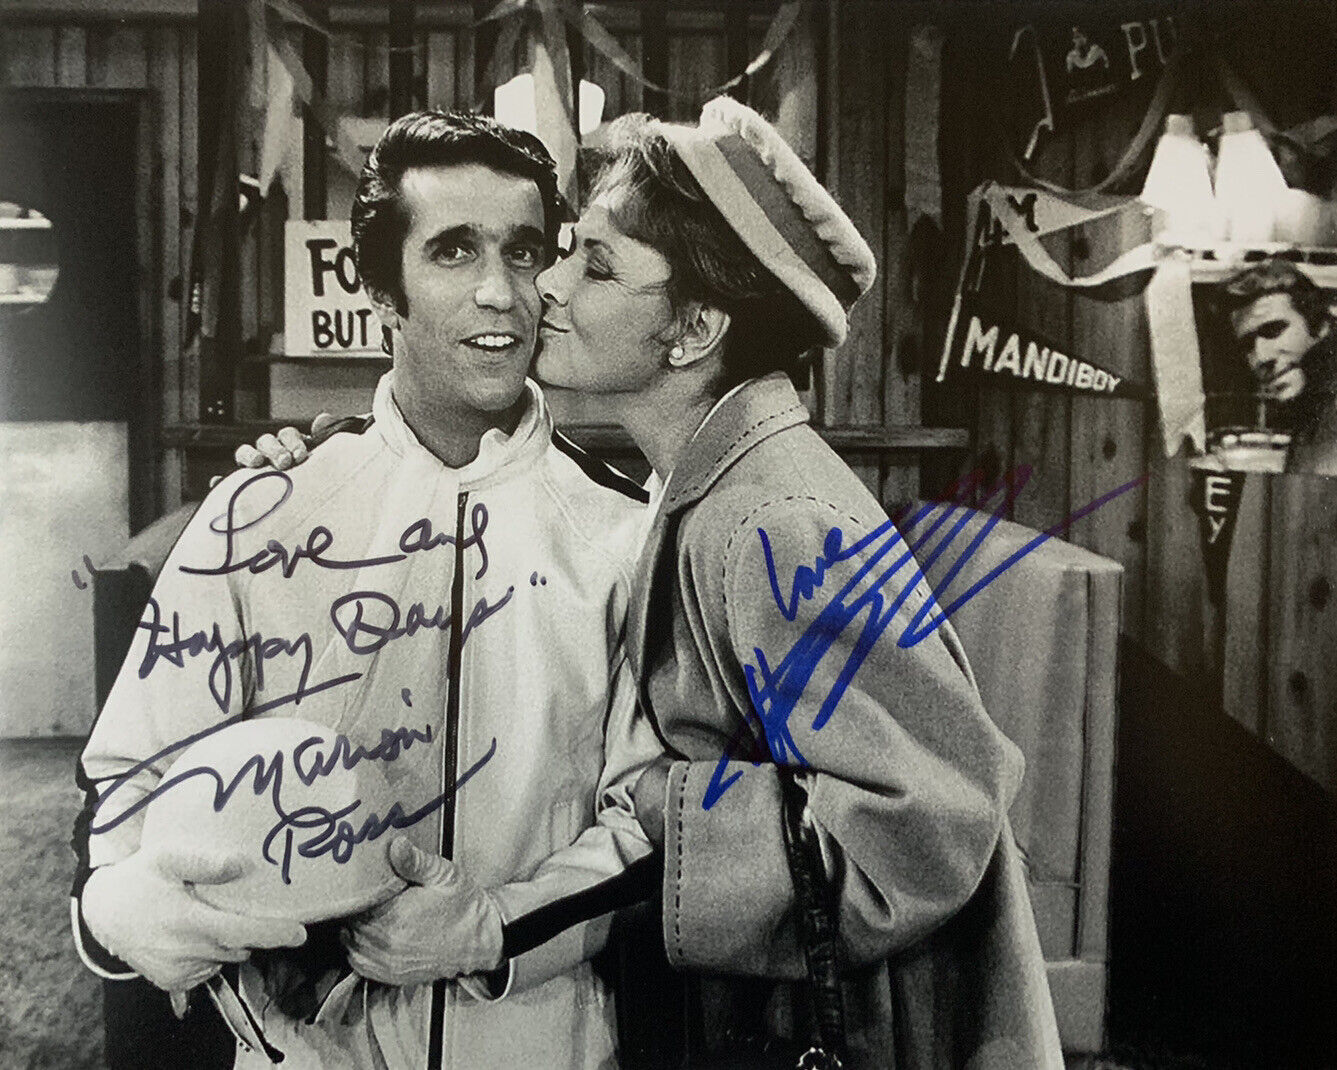 HENRY WINKLER & MARION ROSS SIGNED 8x10 Photo Poster painting HAPPY DAYS AUTHENTIC AUTOGRAPH COA